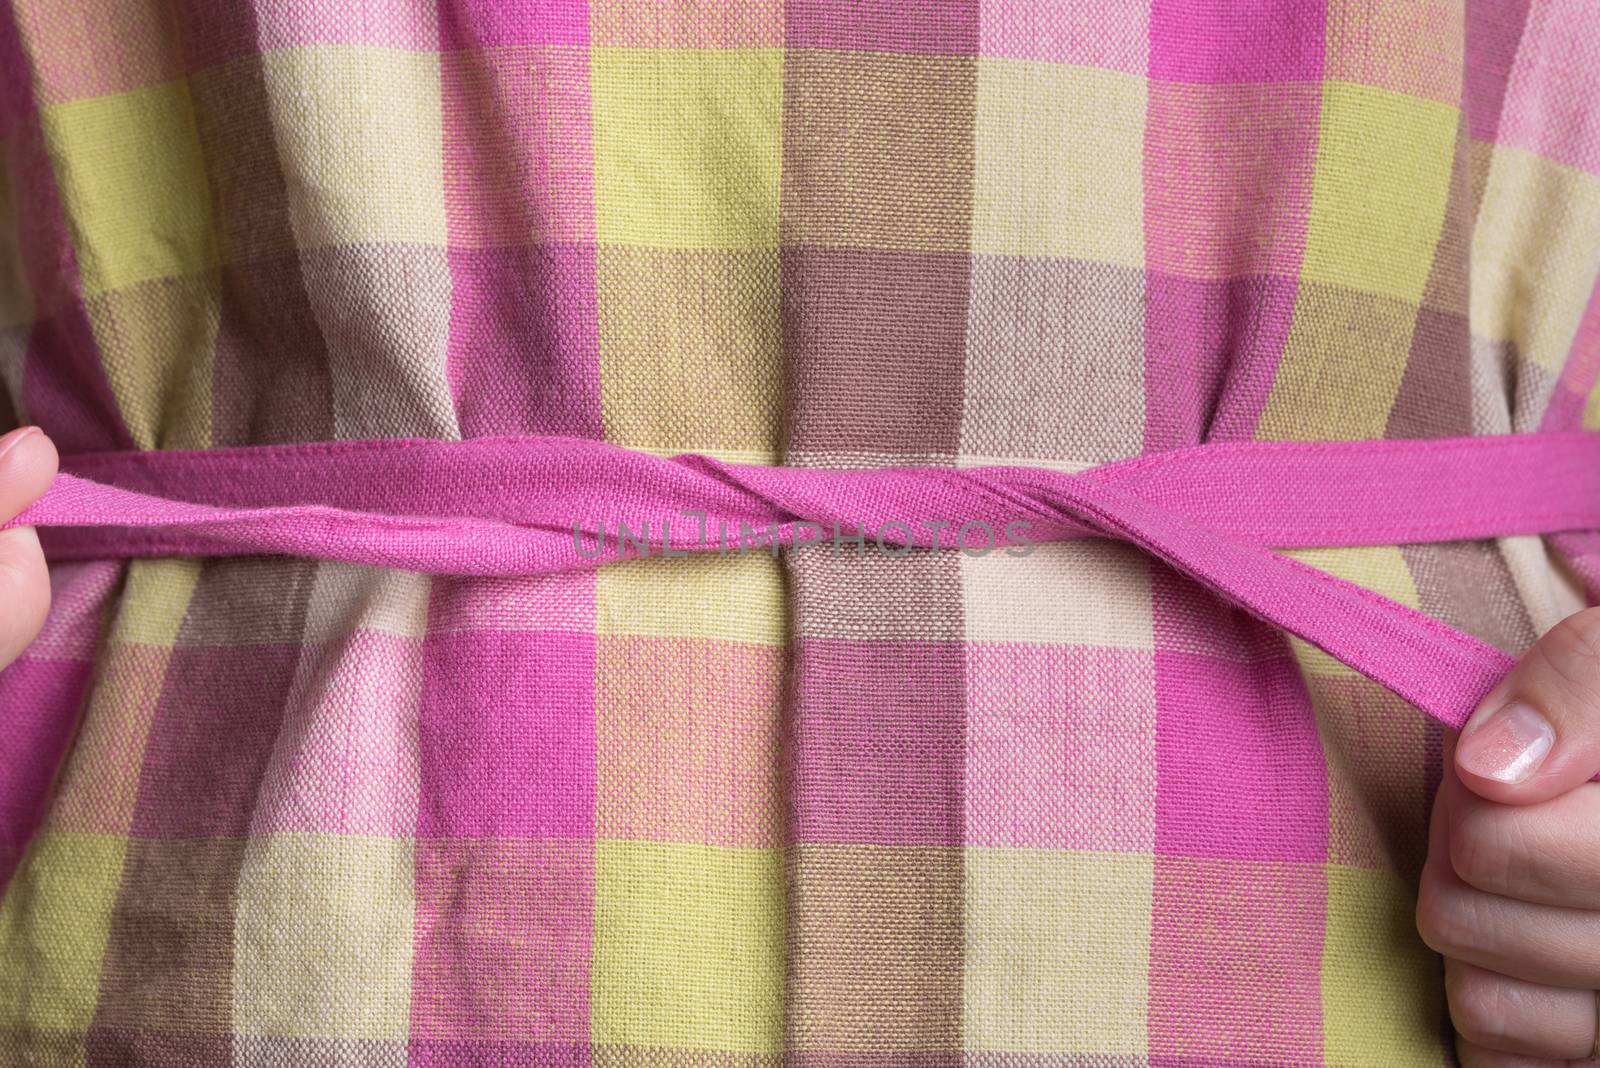 A woman tying a pink and yellow plaid apron.